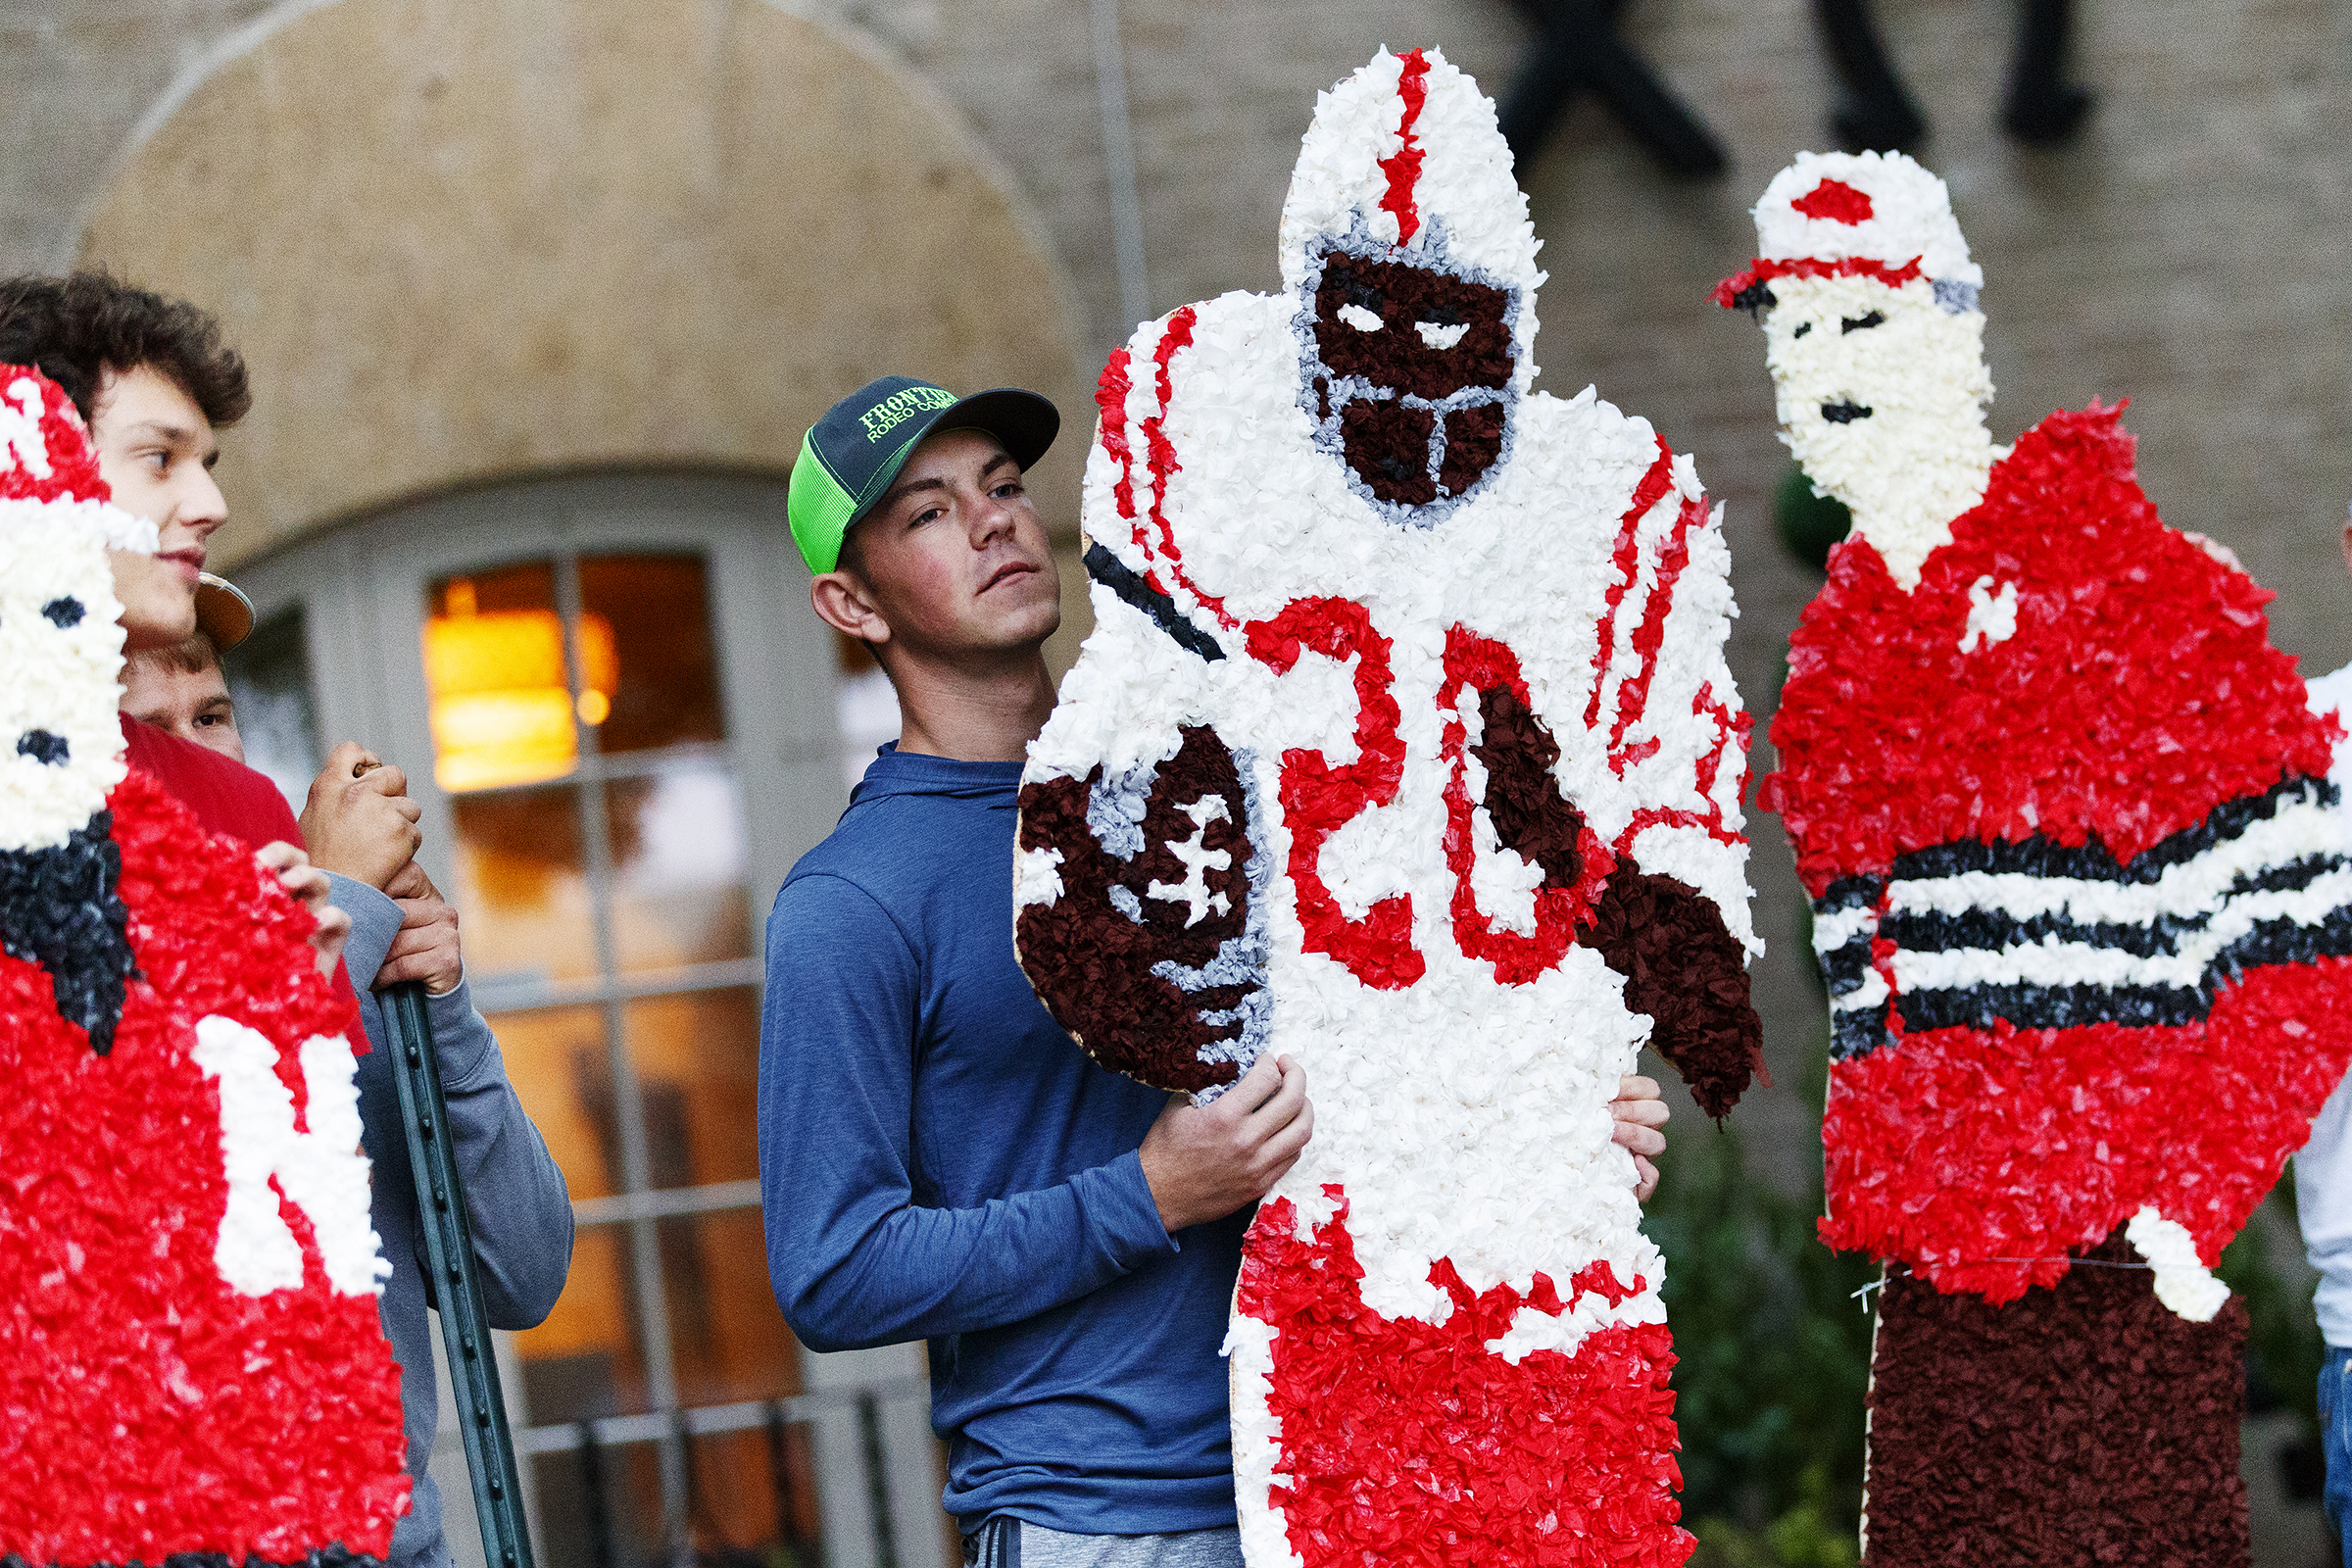 Parade, pep rally, game to cap Huskers' festivities